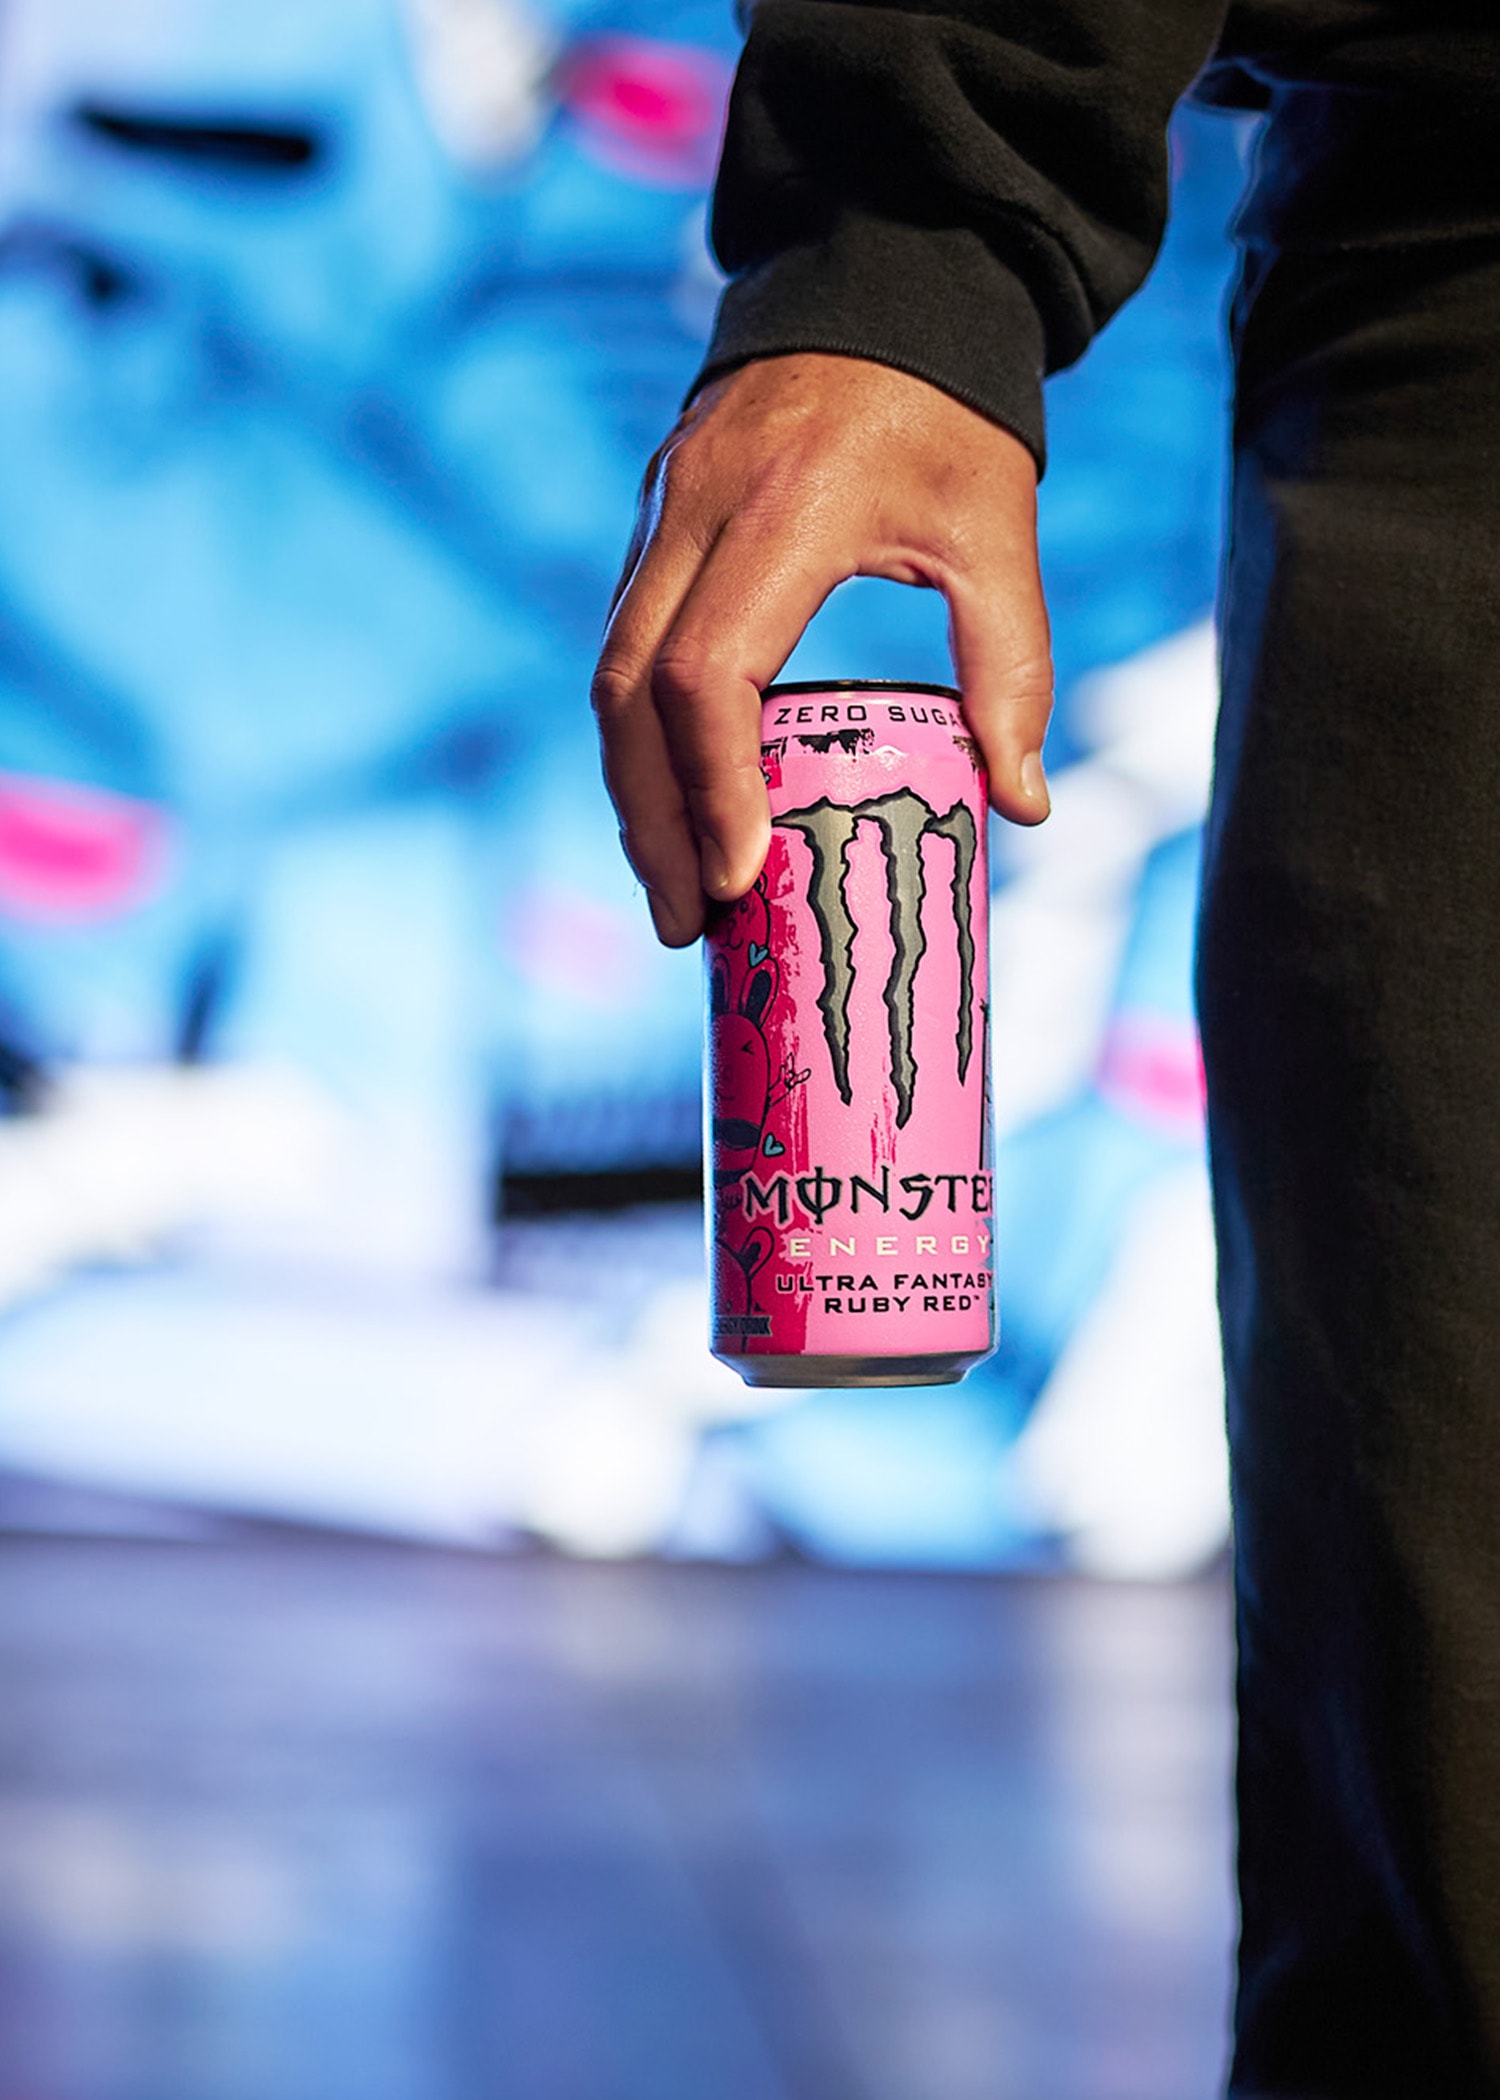 Monster Energy Ultra is Hosting an Immersive Fantasy Event with Interactive Art